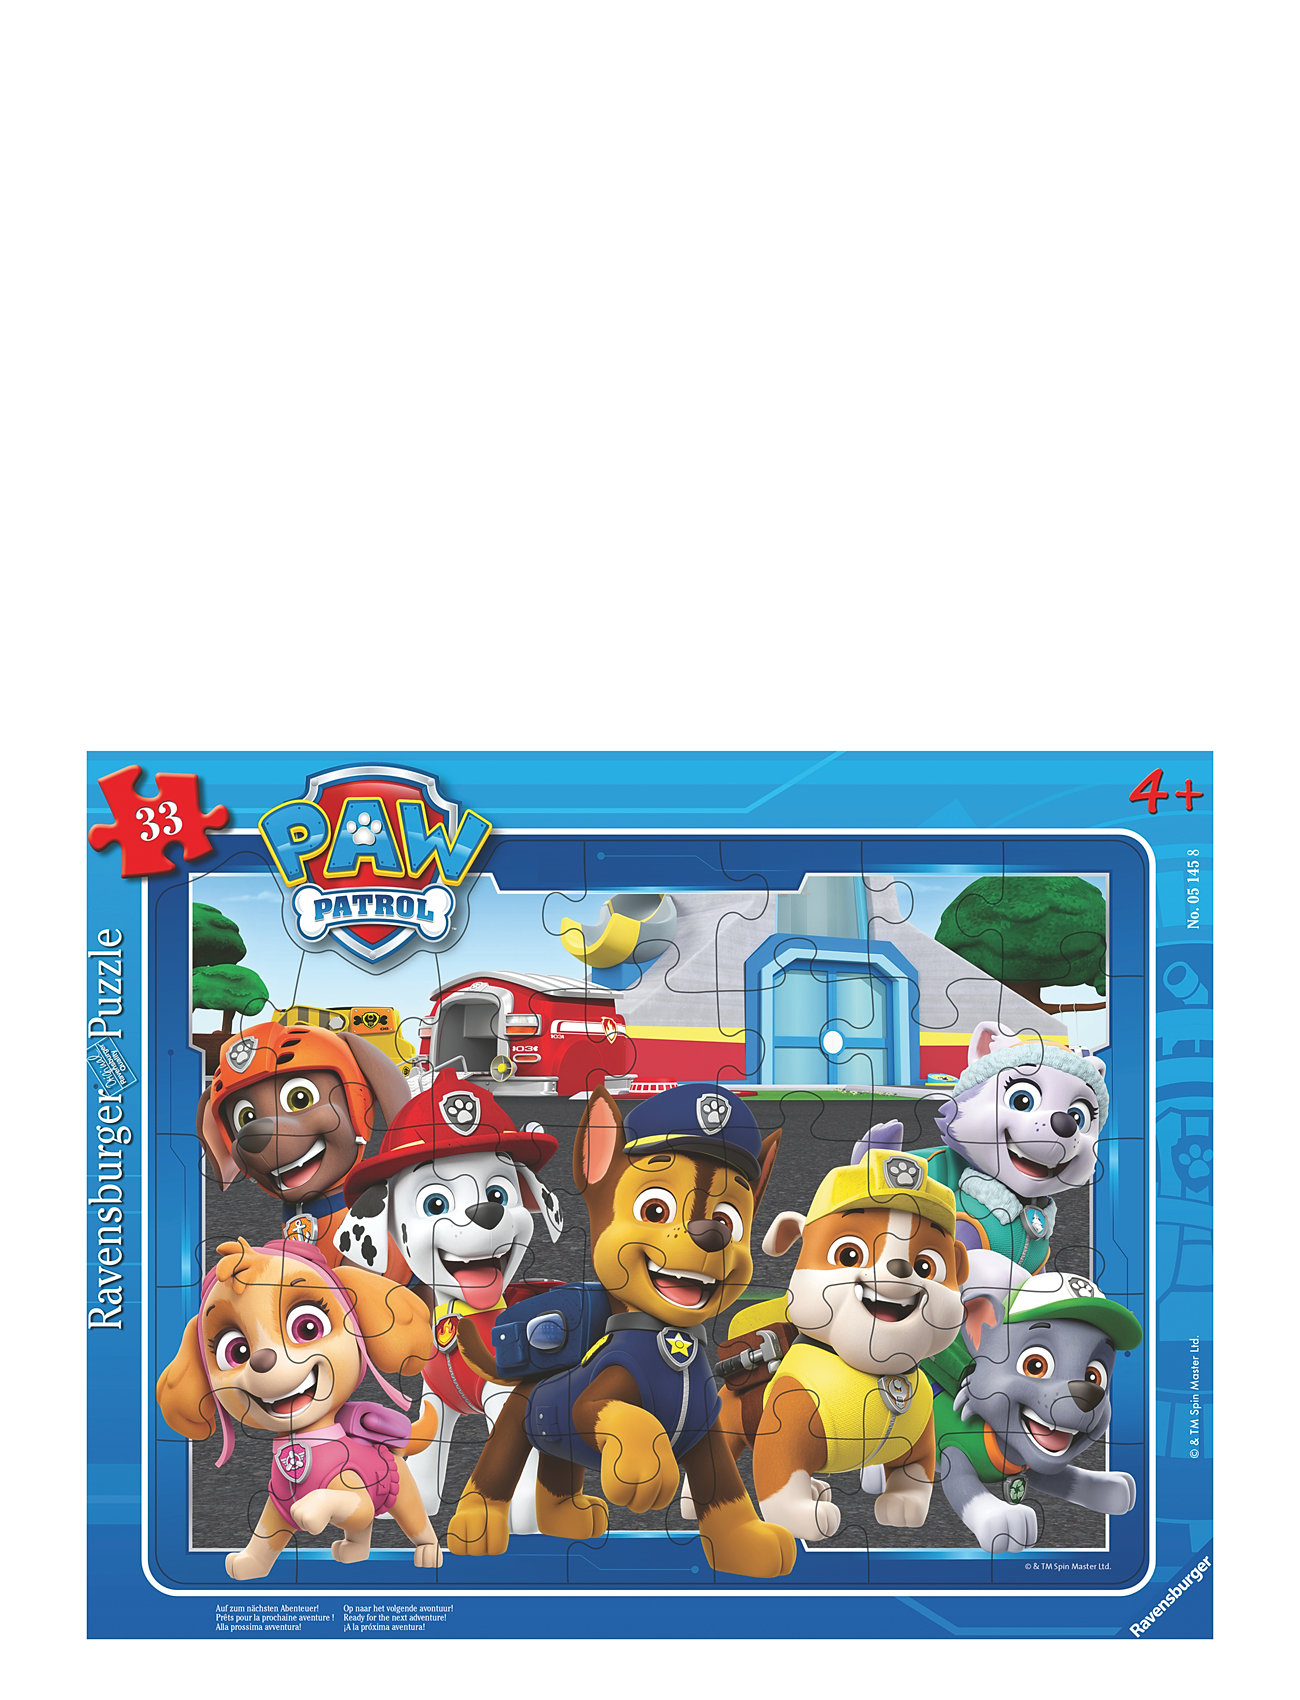 Paw Patrol Ready For The Next Adventure! 30-48P Toys Puzzles And Games Puzzles Classic Puzzles Multi/patterned Ravensburger